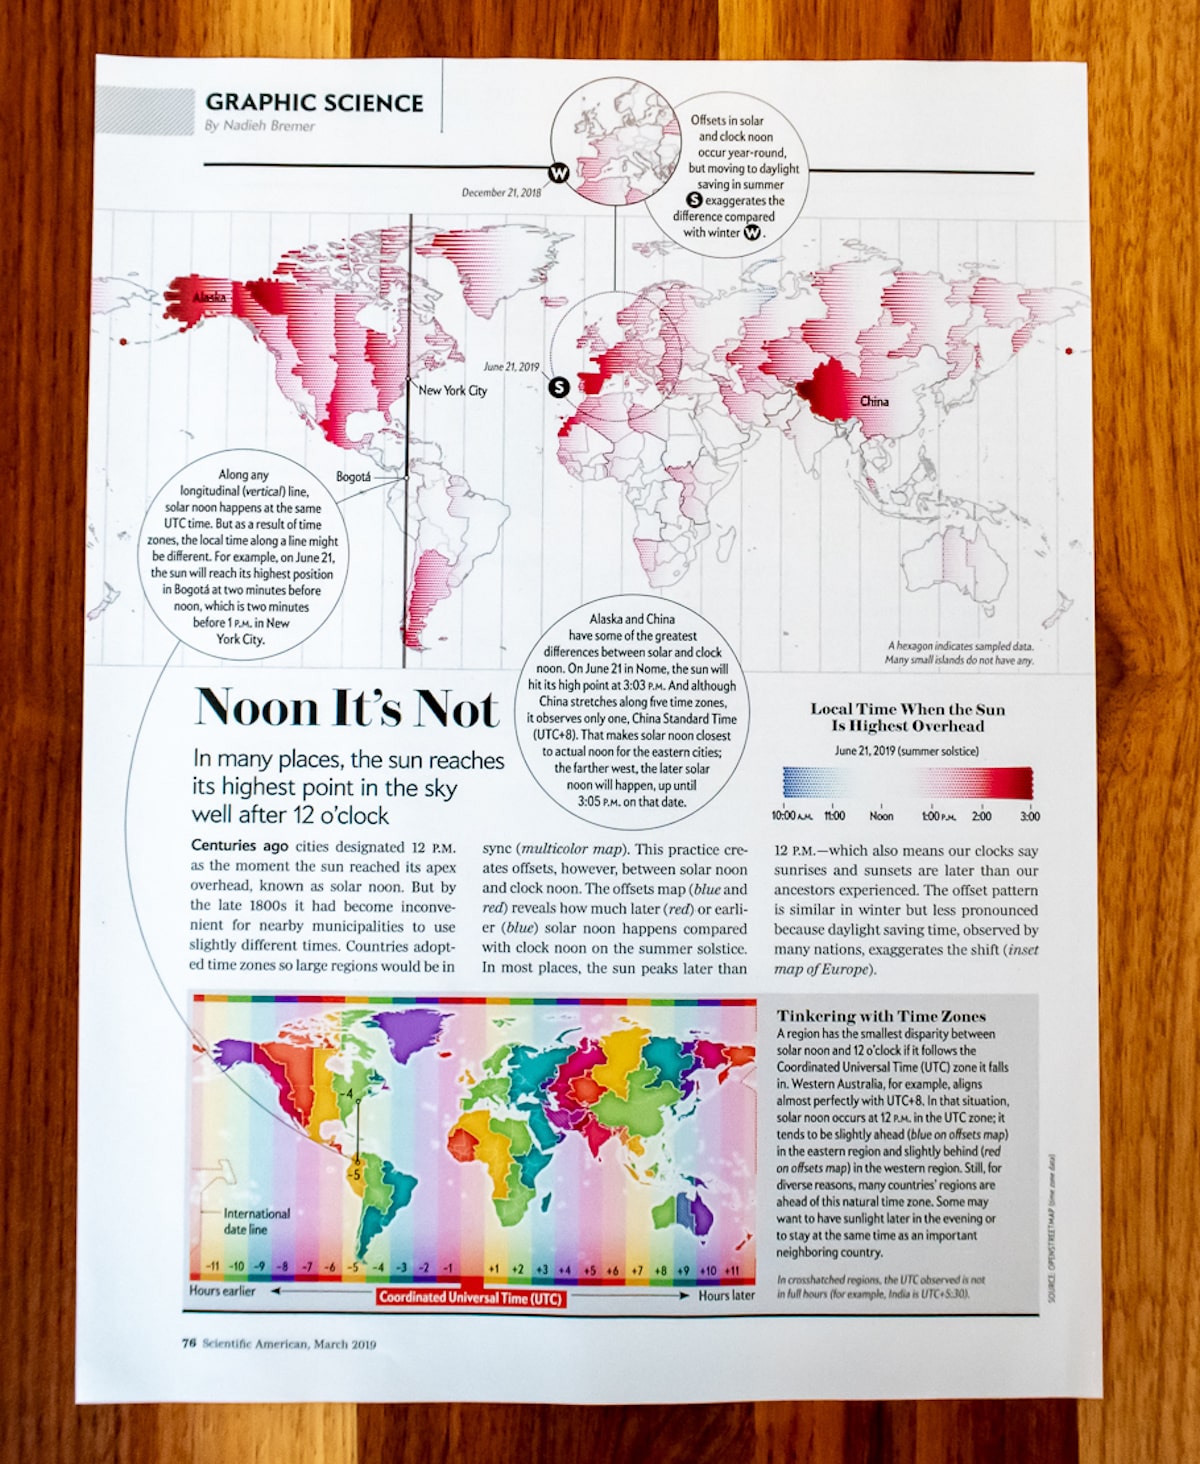 The Graphic Science page from the March 2019 issue of the Scientific American